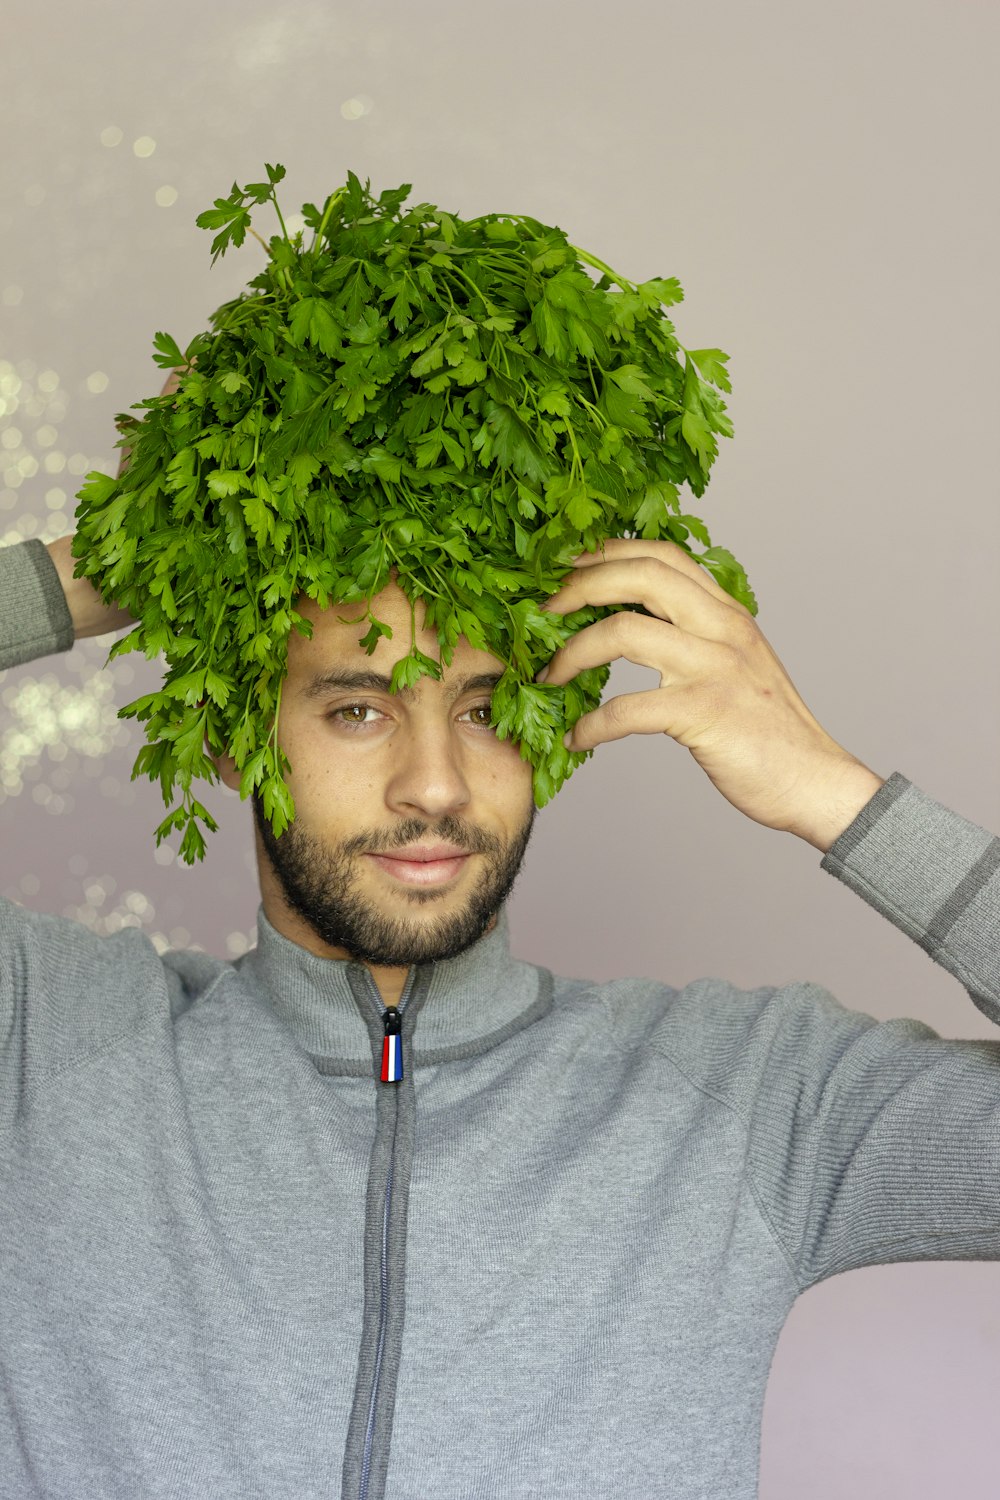 man in gray zip up jacket holding green plant